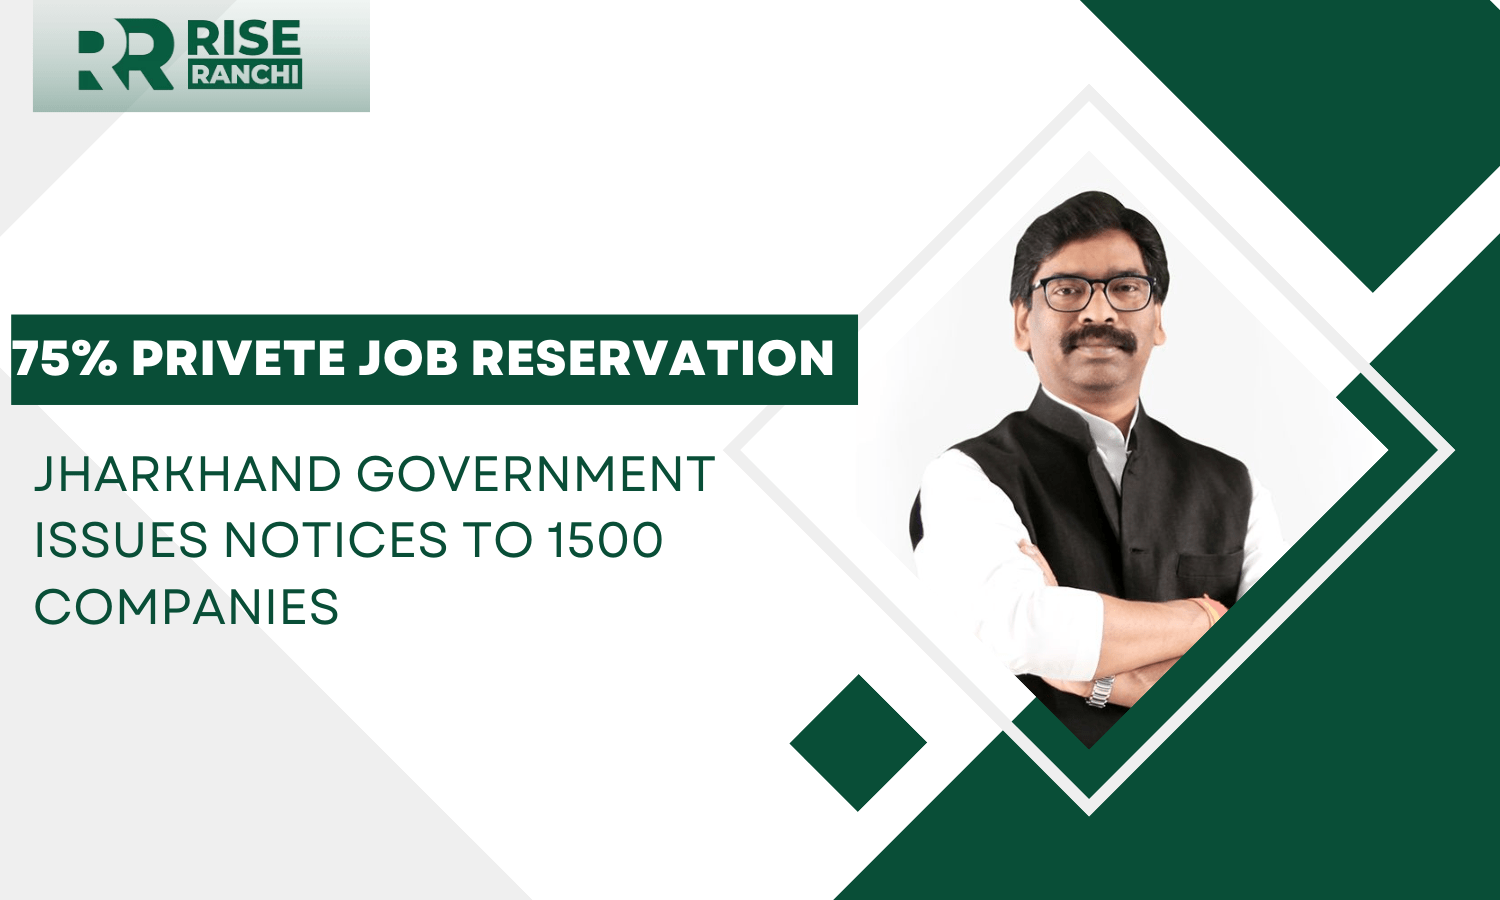 Jharkhand Government Issues Notices to 1500 Companies Enforcing 75% Privete Job Reservation